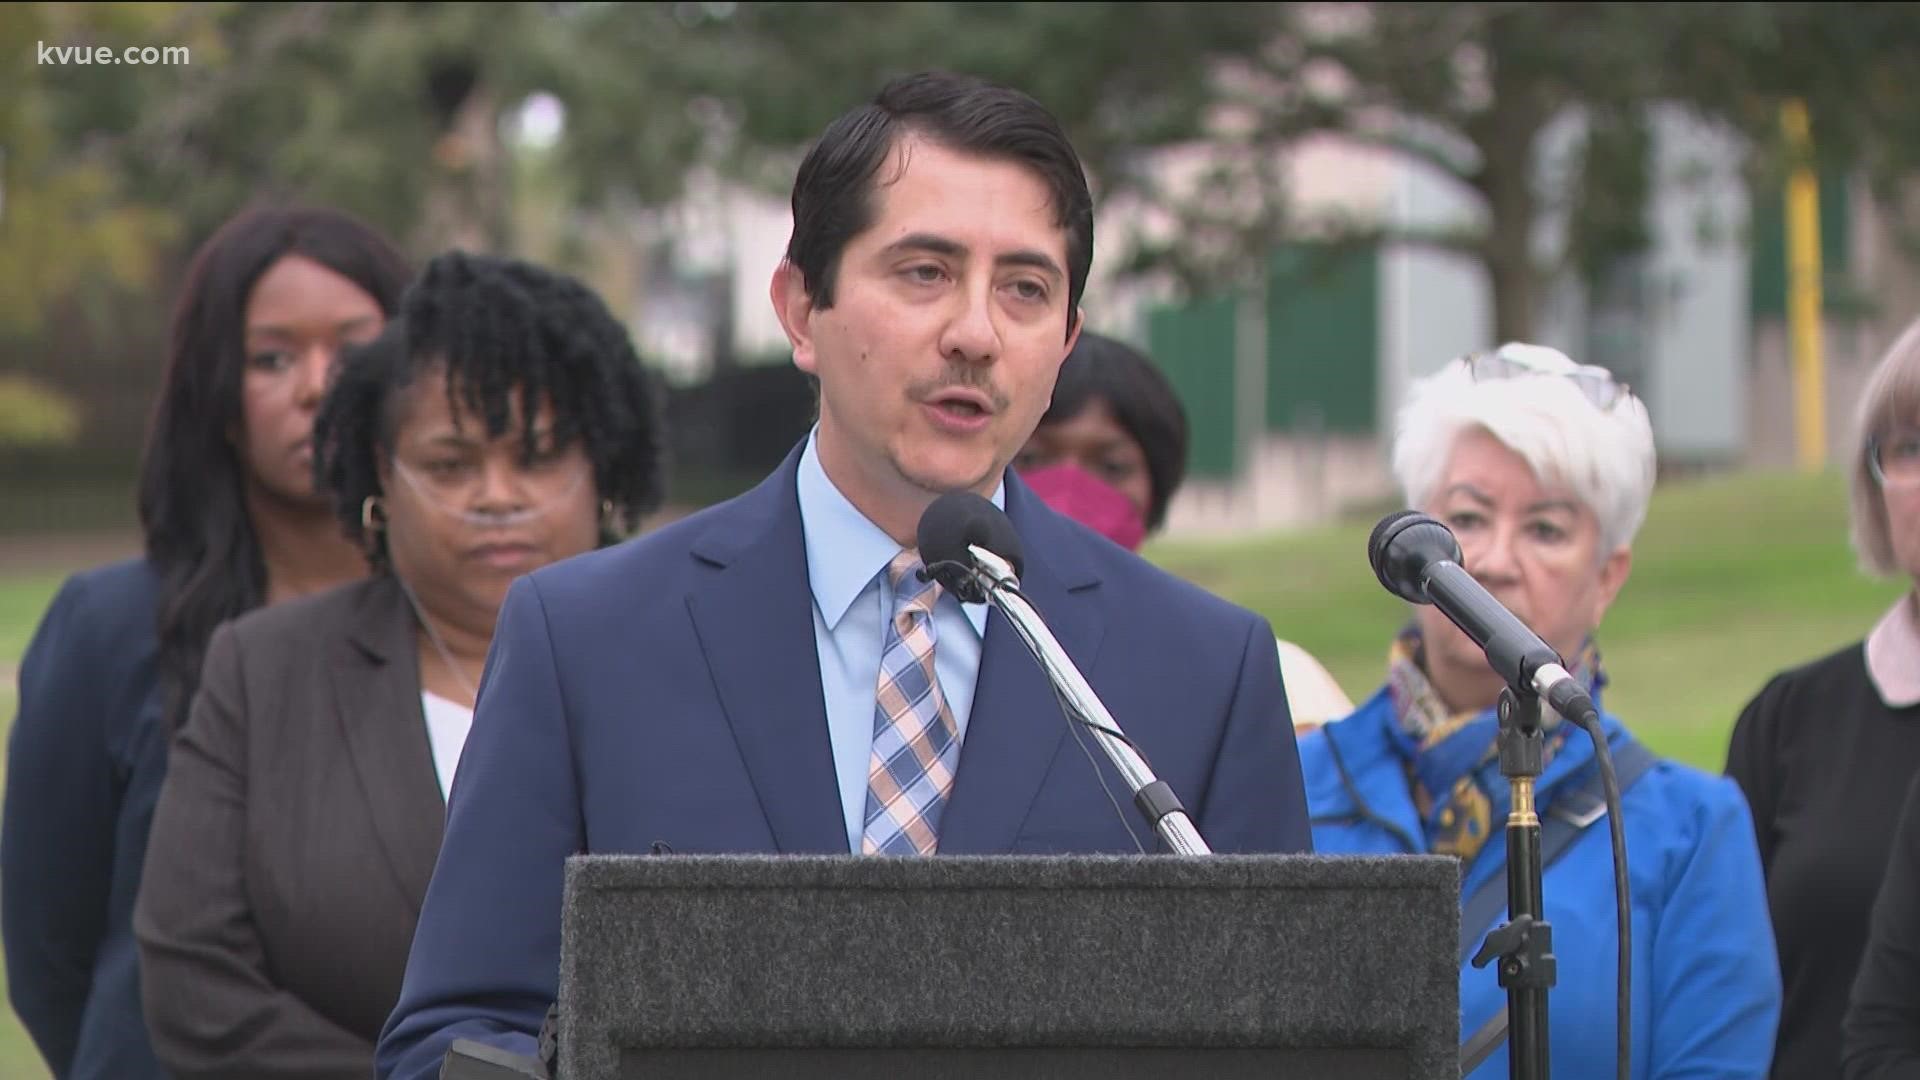 County and city leaders joined together Tuesday morning, calling gun violence a pandemic. There have been 82 homicides reported in Travis County in 2021.